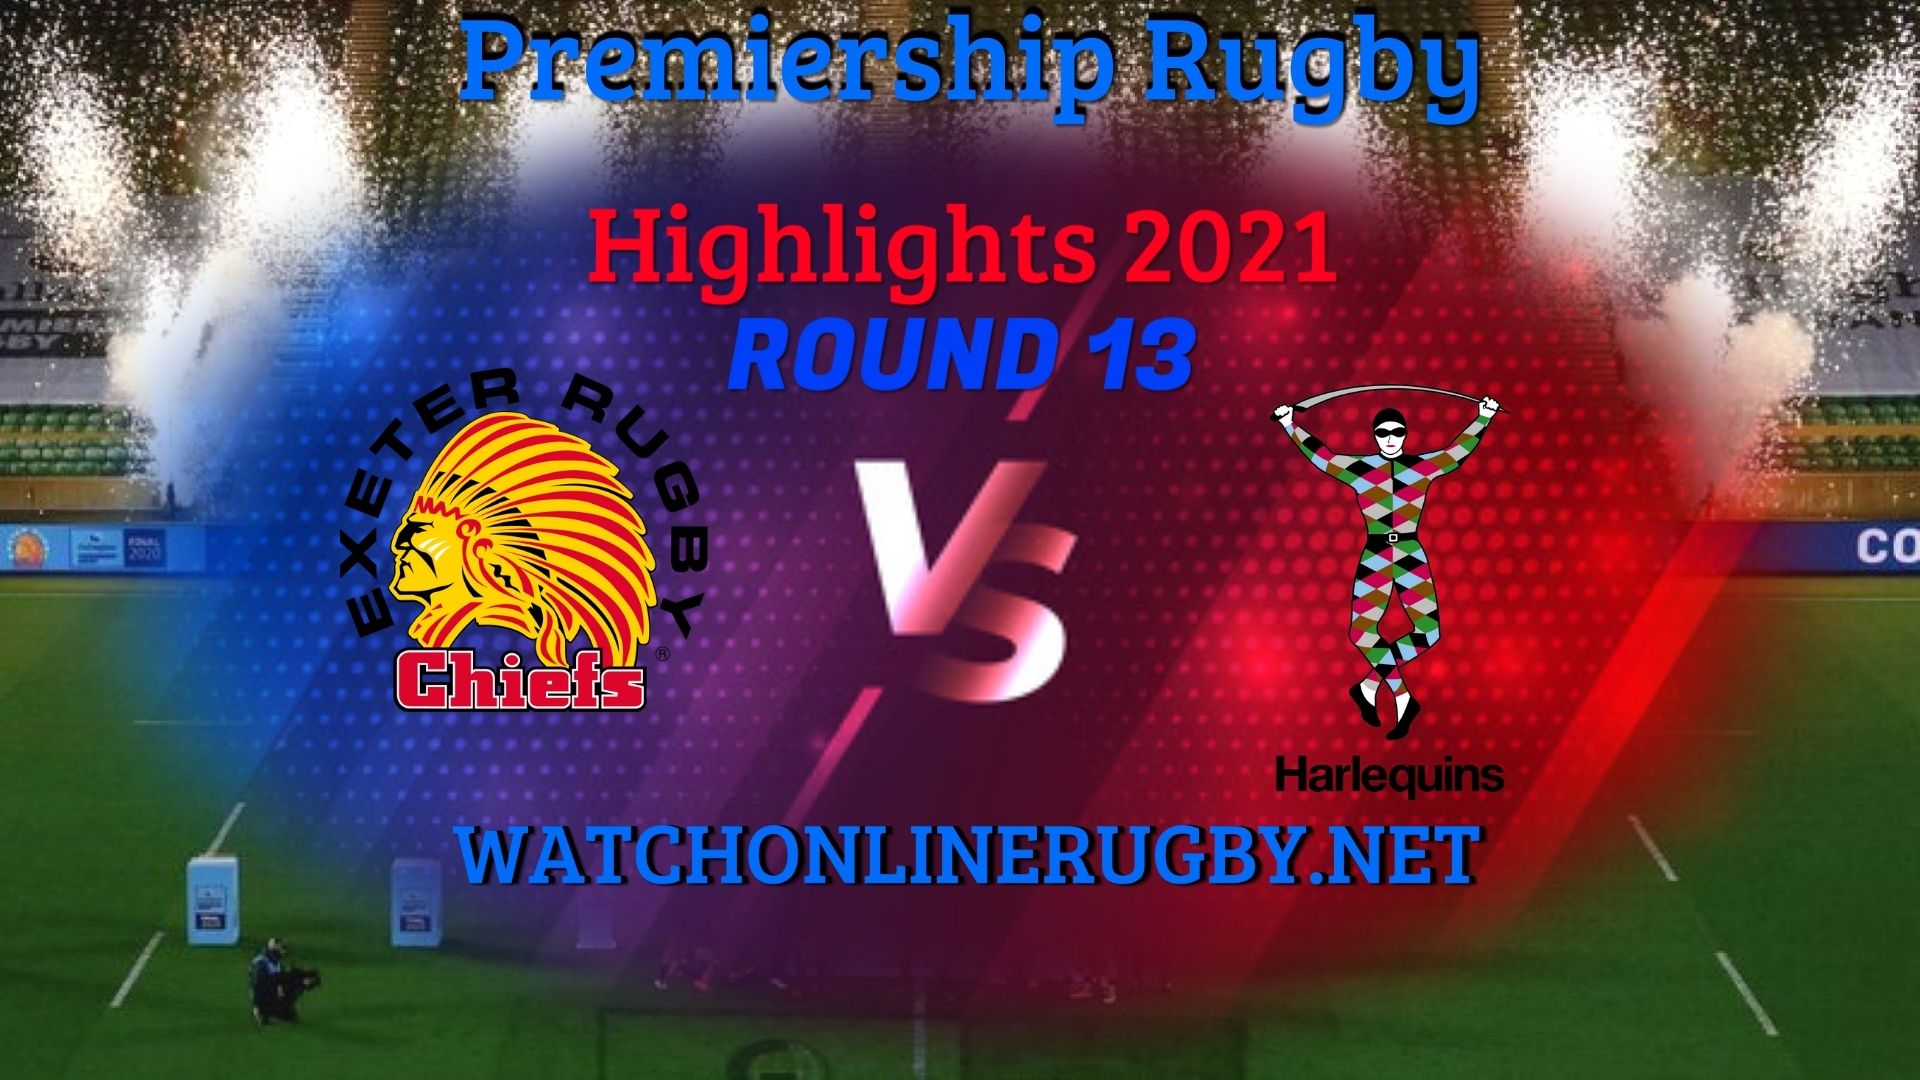 Exeter Chiefs Vs Harlequins Premiership Rugby 2021 RD 13